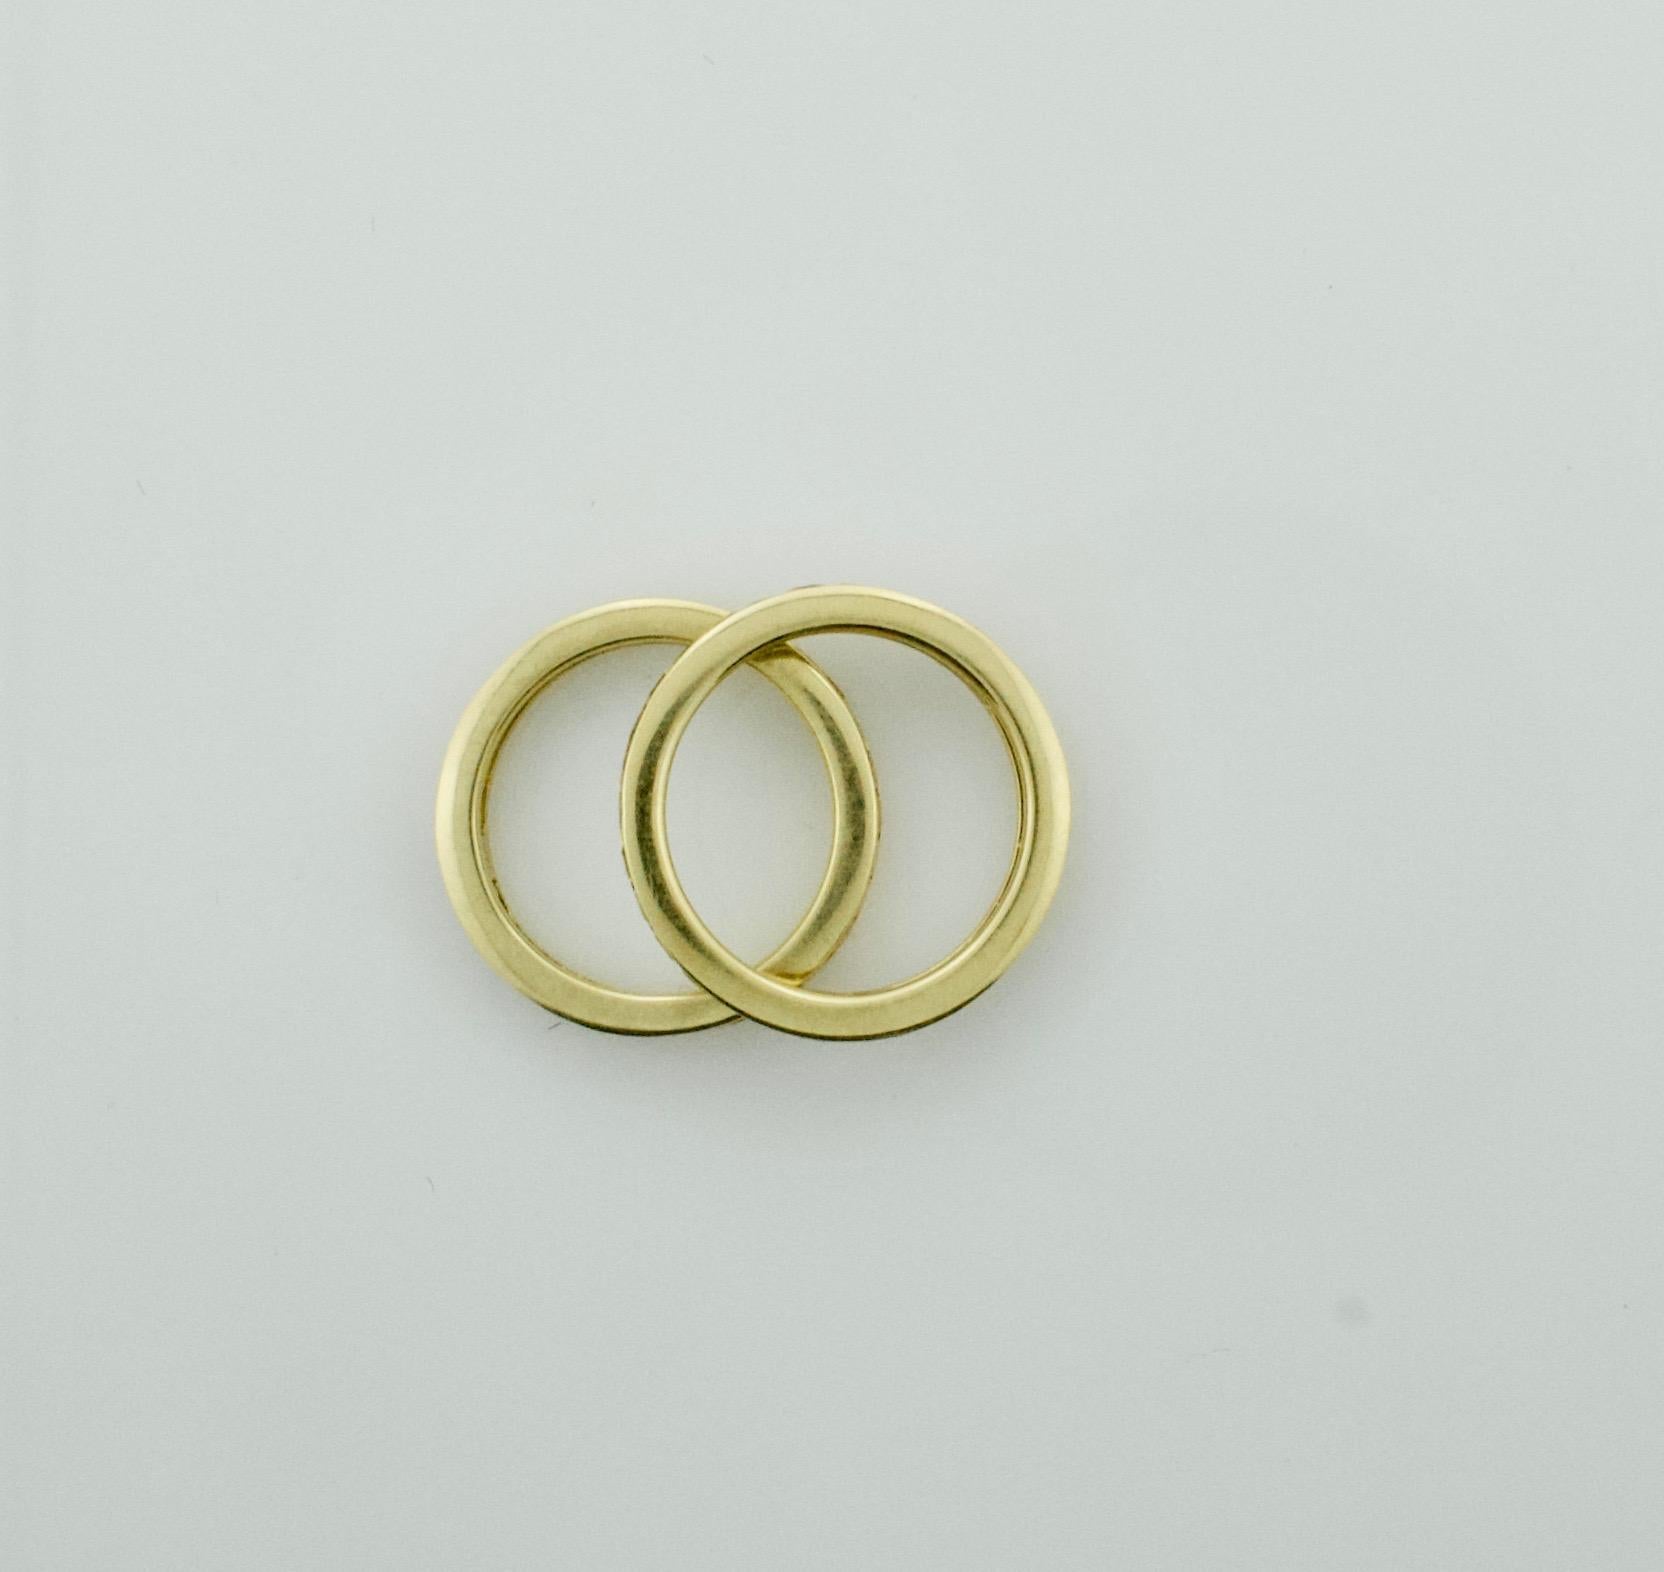 Pair of Golden Sapphire Eternity Rings in 18k Yellow Gold
60 French Cut Cut Golden Sapphires Weighing 3.75 Carats Approximately [bright with no imperfections visible to the naked eye]
Stackable and Lovable
Size 6.5+